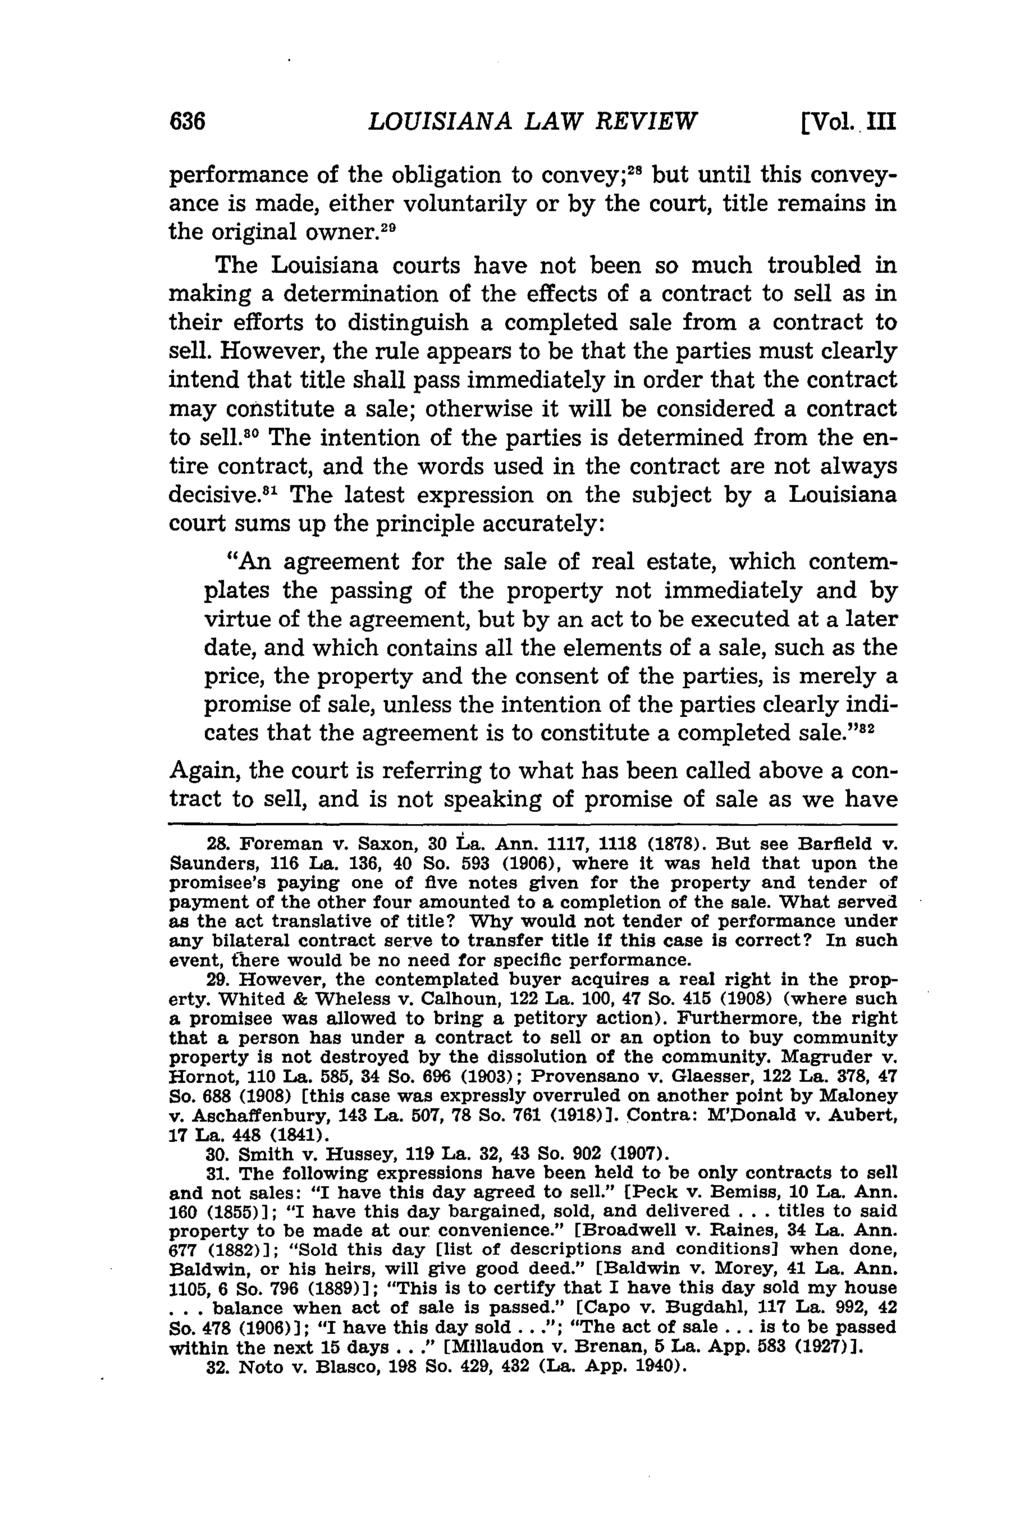 LOUISIANA LAW REVIEW [Vol. In performance of the obligation to convey; 2 but until this conveyance is made, either voluntarily or by the court, title remains in the original owner.